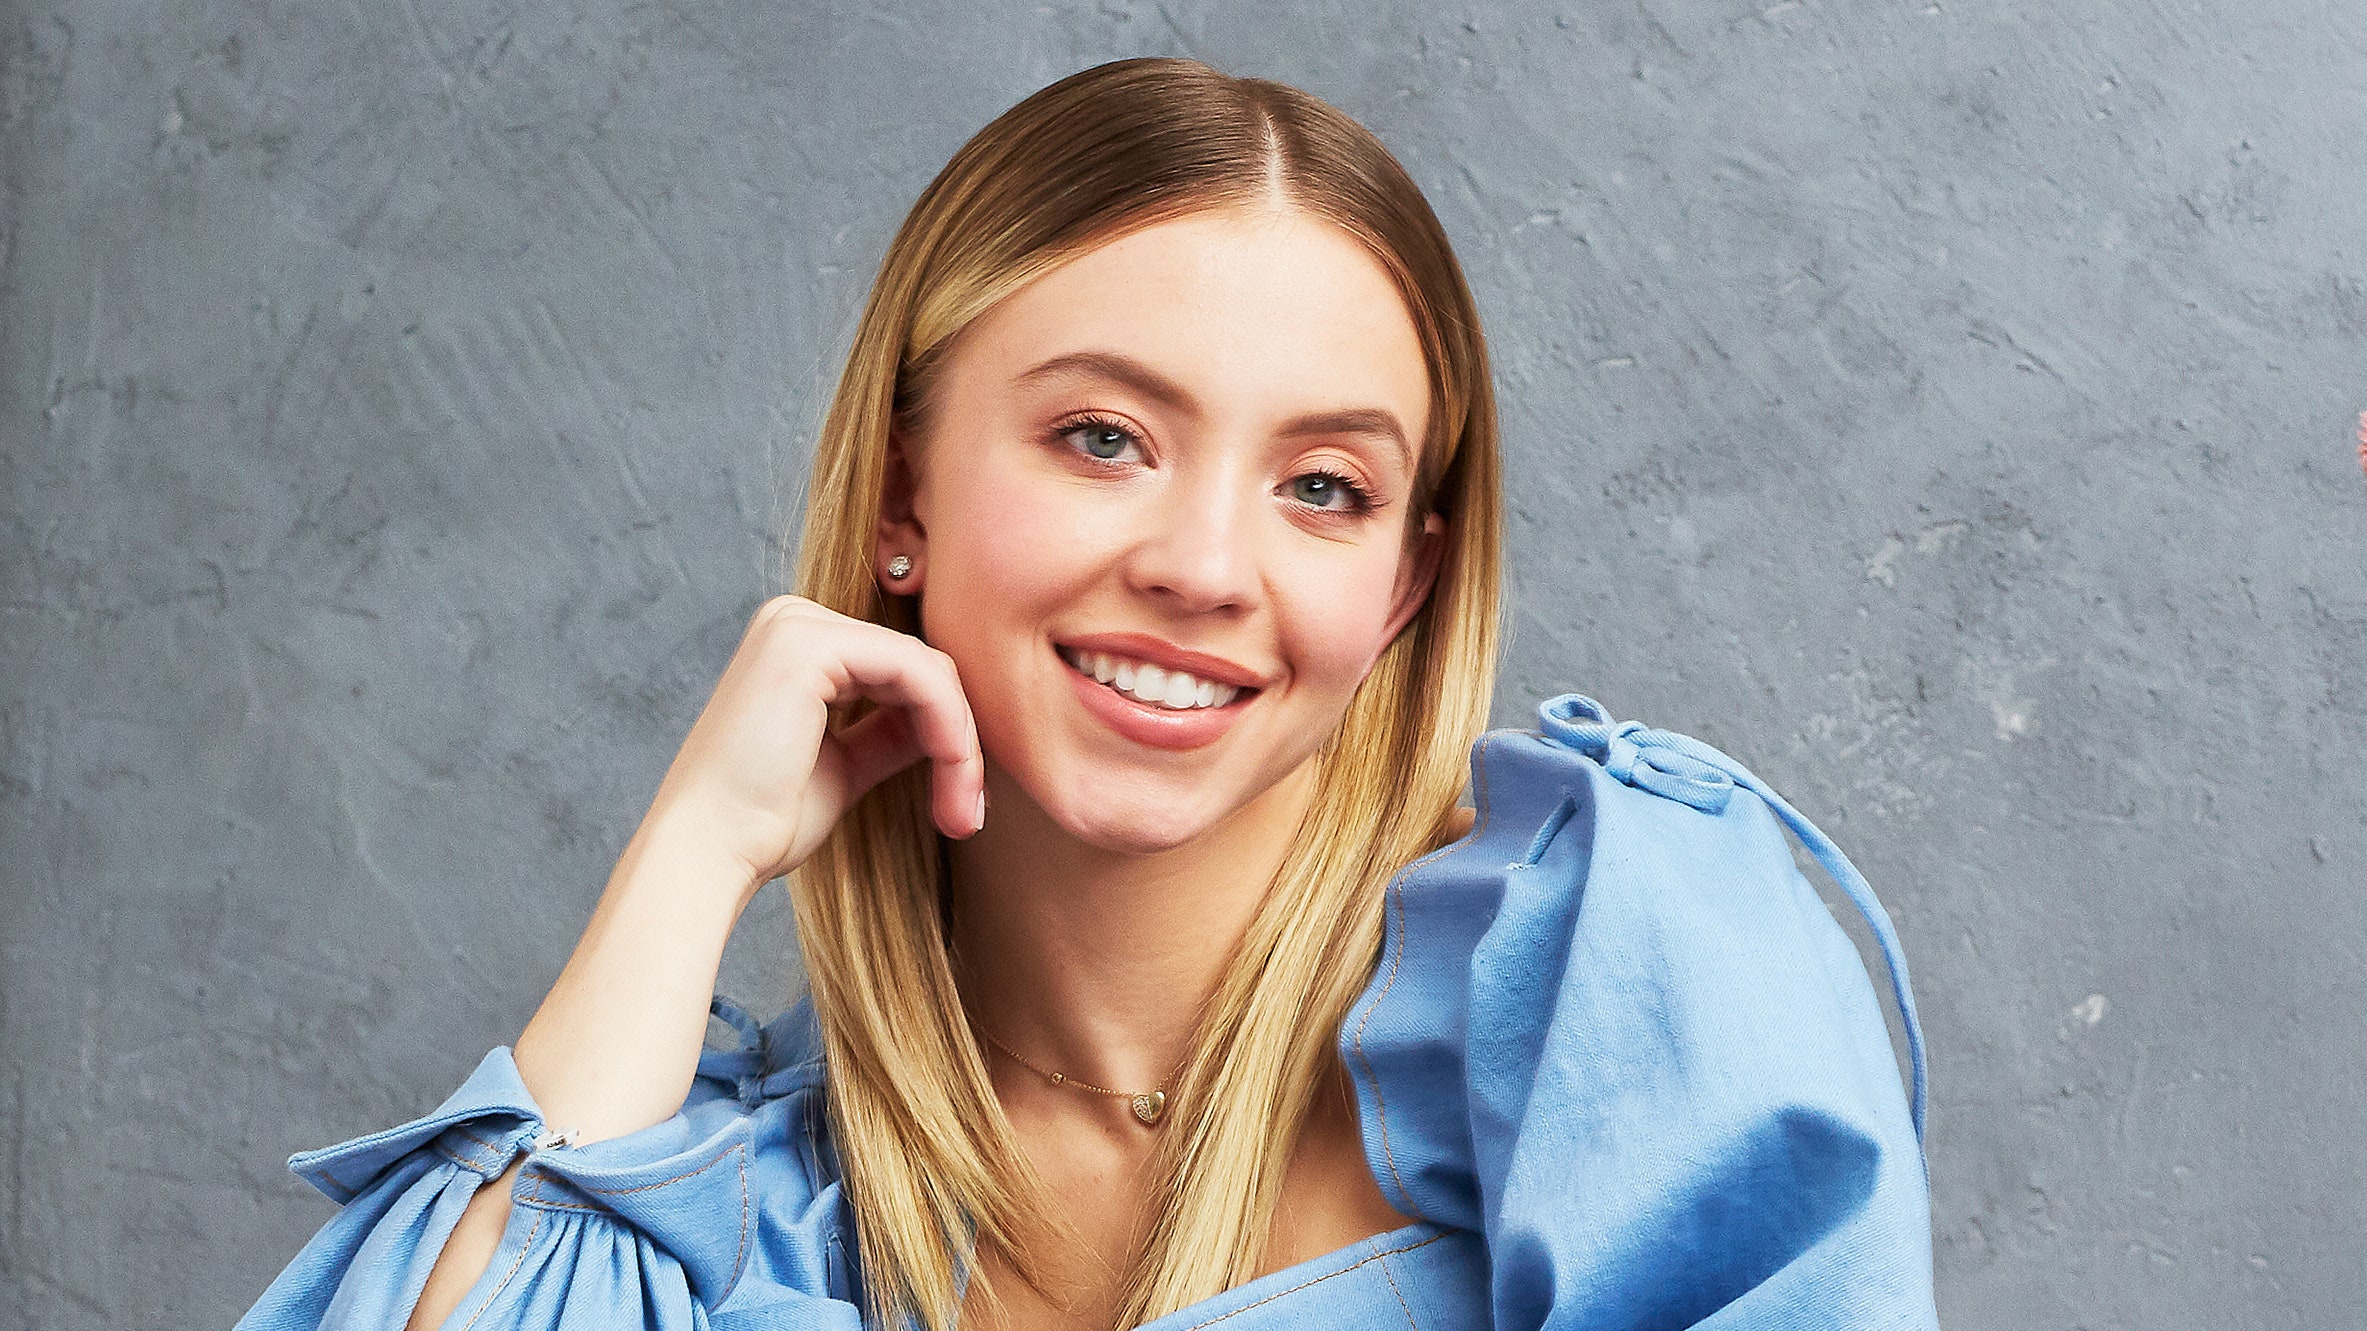 Sydney Sweeney Plastic Surgery – Before and After. Nose Job, Facelift, Body Measurements, and More!